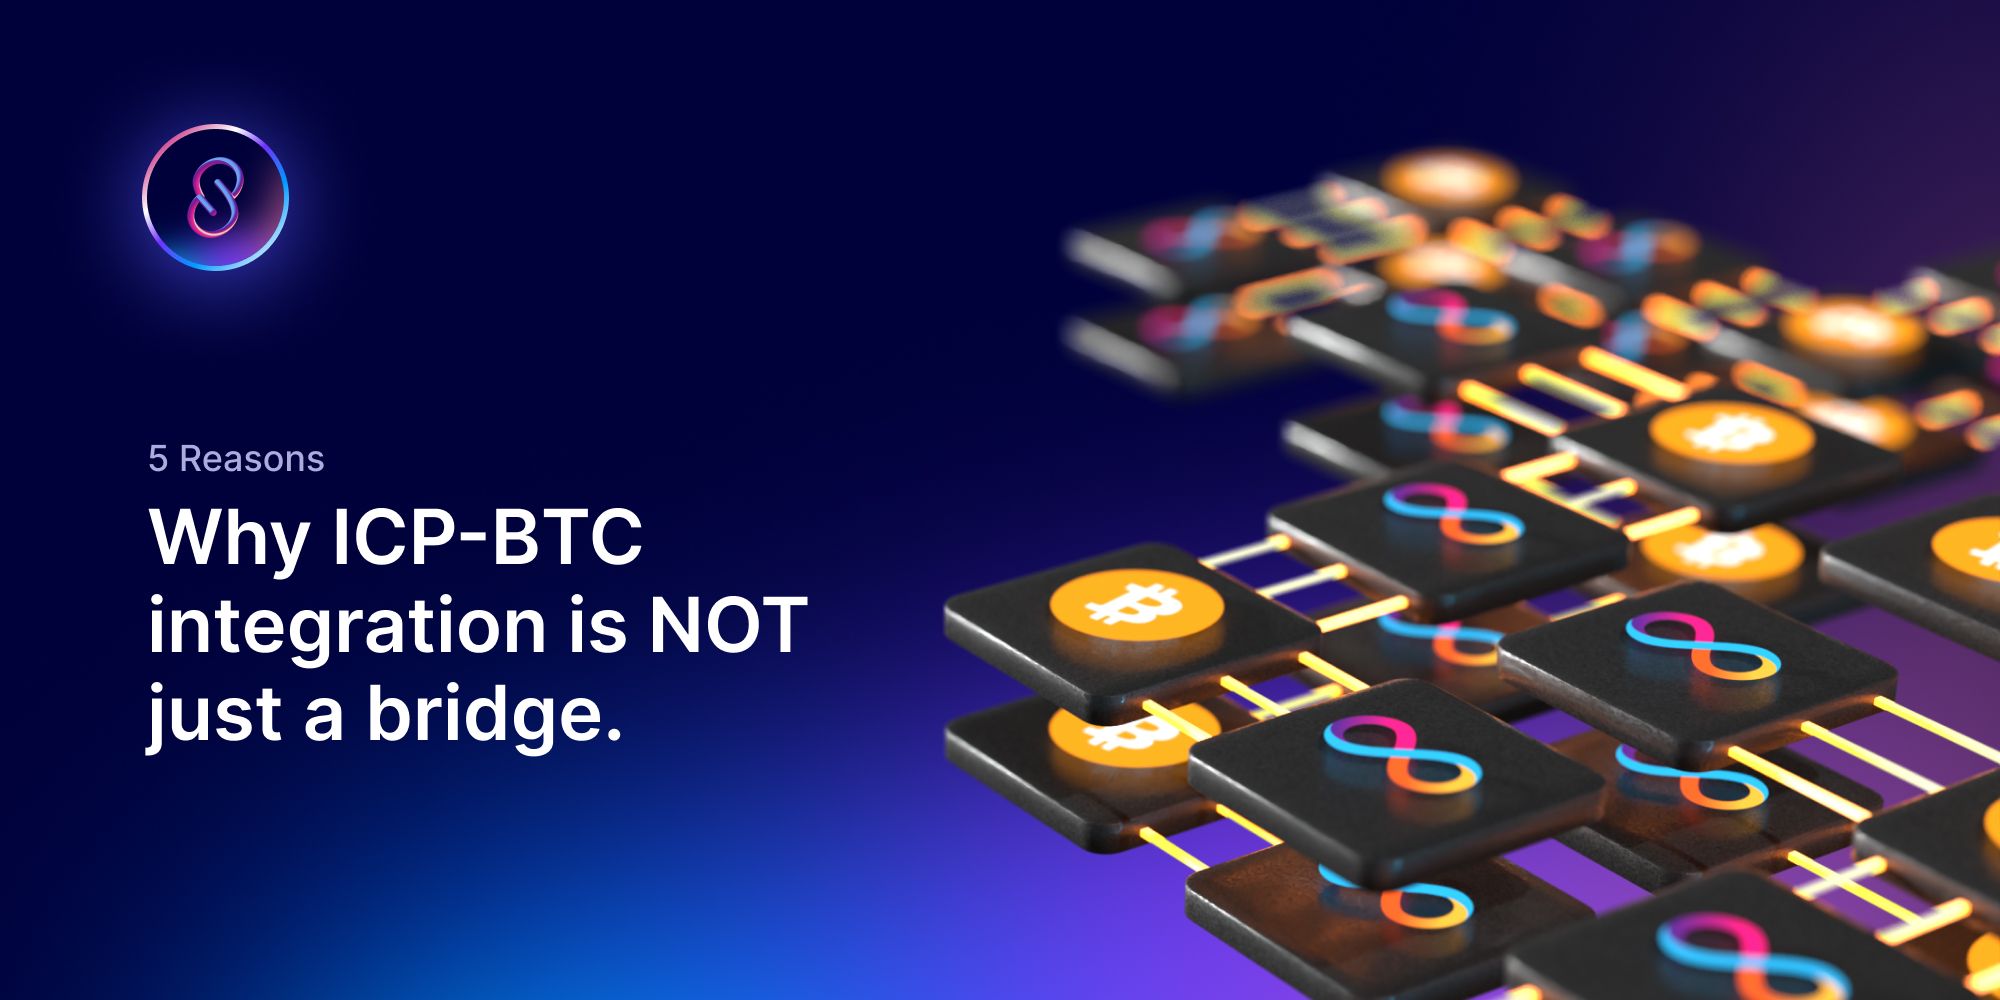 5 Reasons Why ICP-BTC integration is NOT just a bridge.